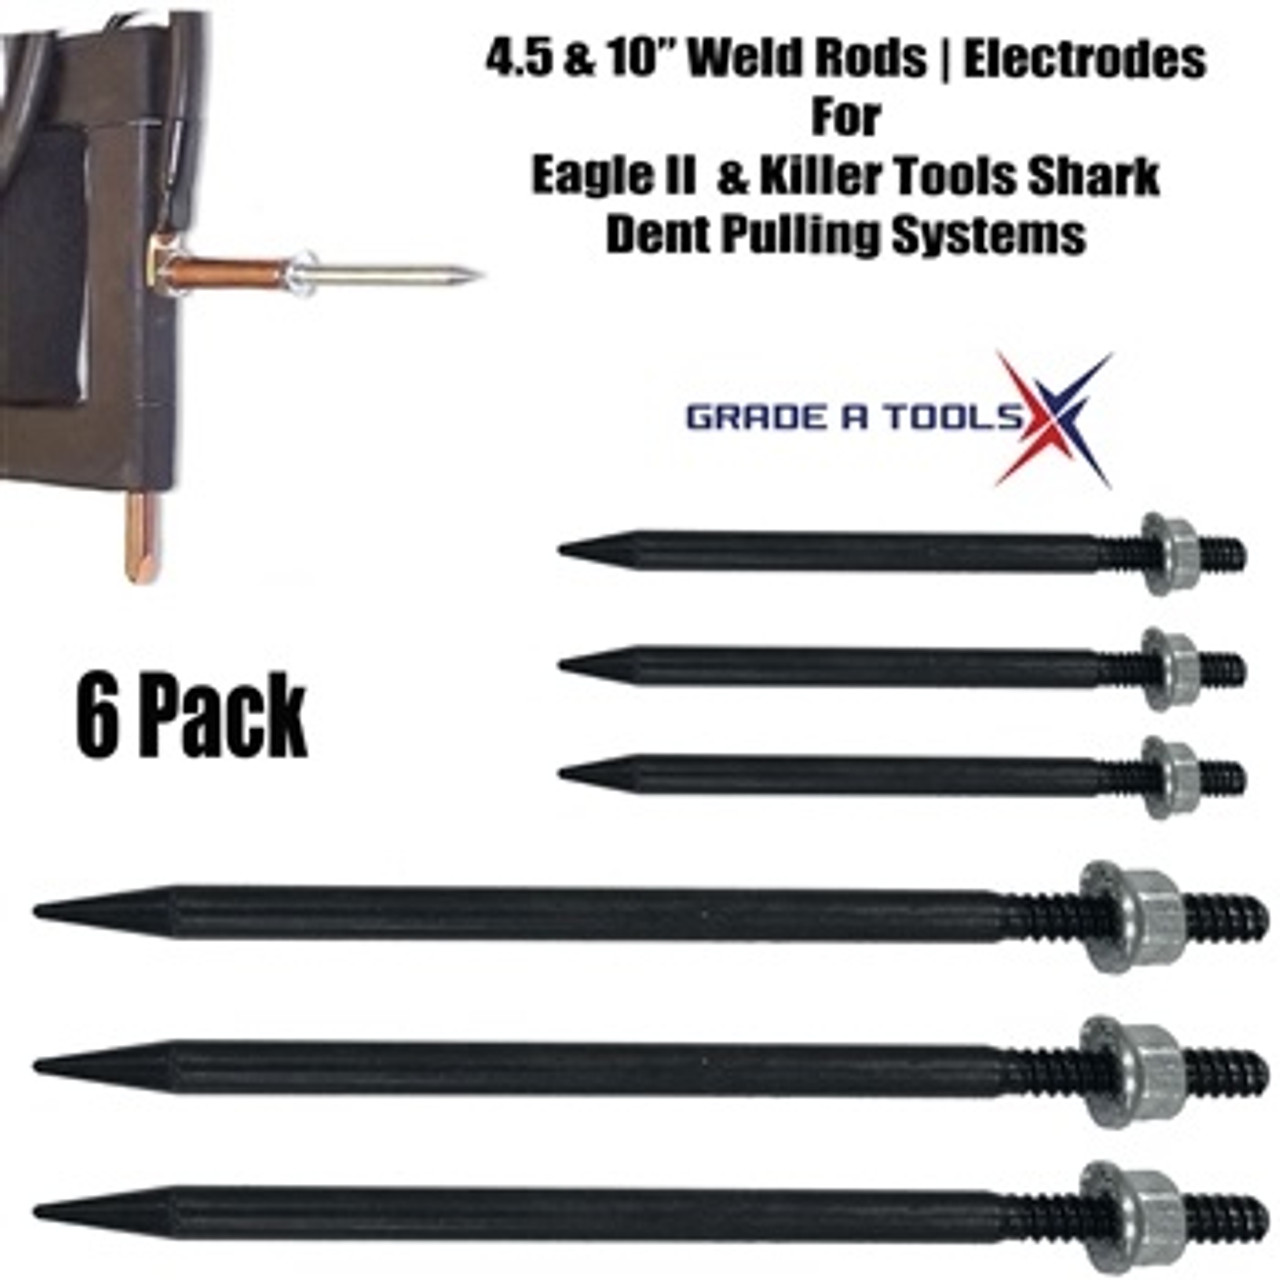 Replacement Weld Rod Electrode 10 & 4.5 6 Pack